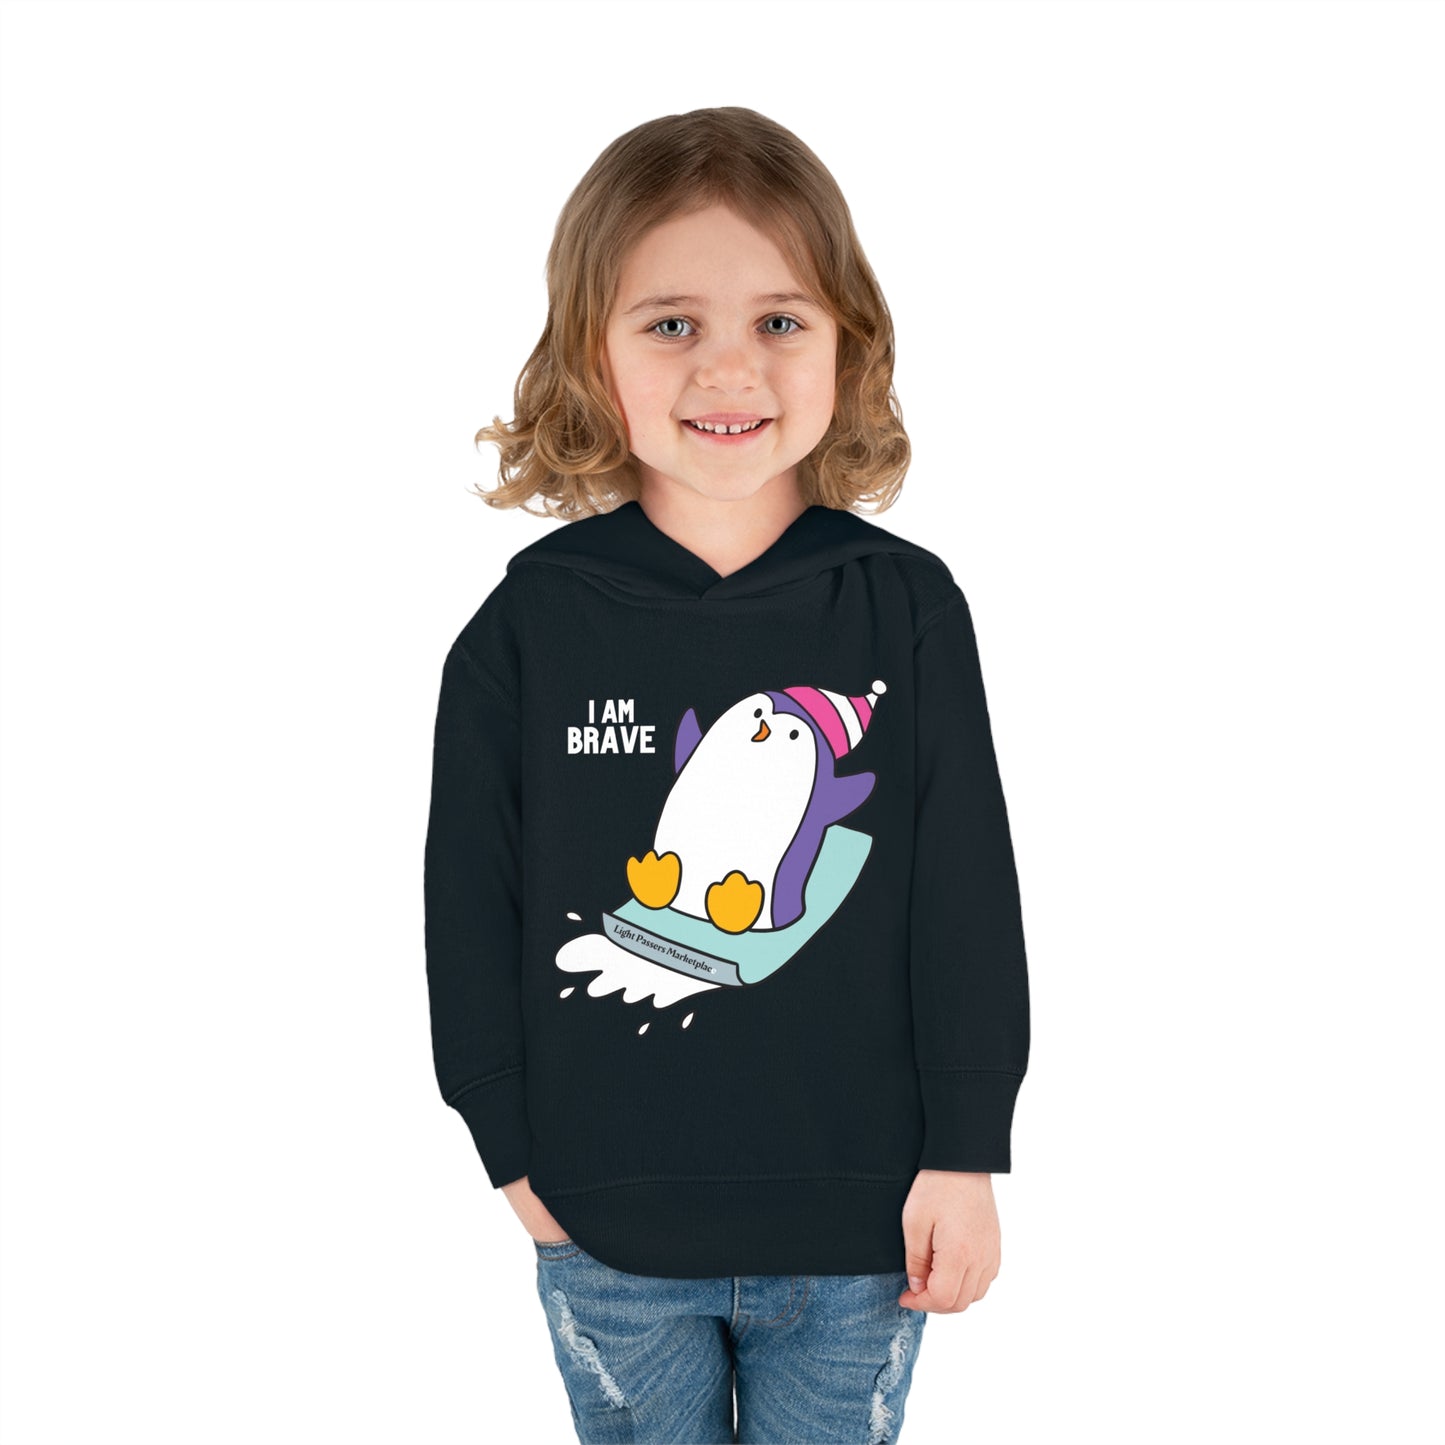 A toddler wearing a black sweatshirt with a penguin design, featuring a jersey-lined hood and side seam pockets for comfort and durability.